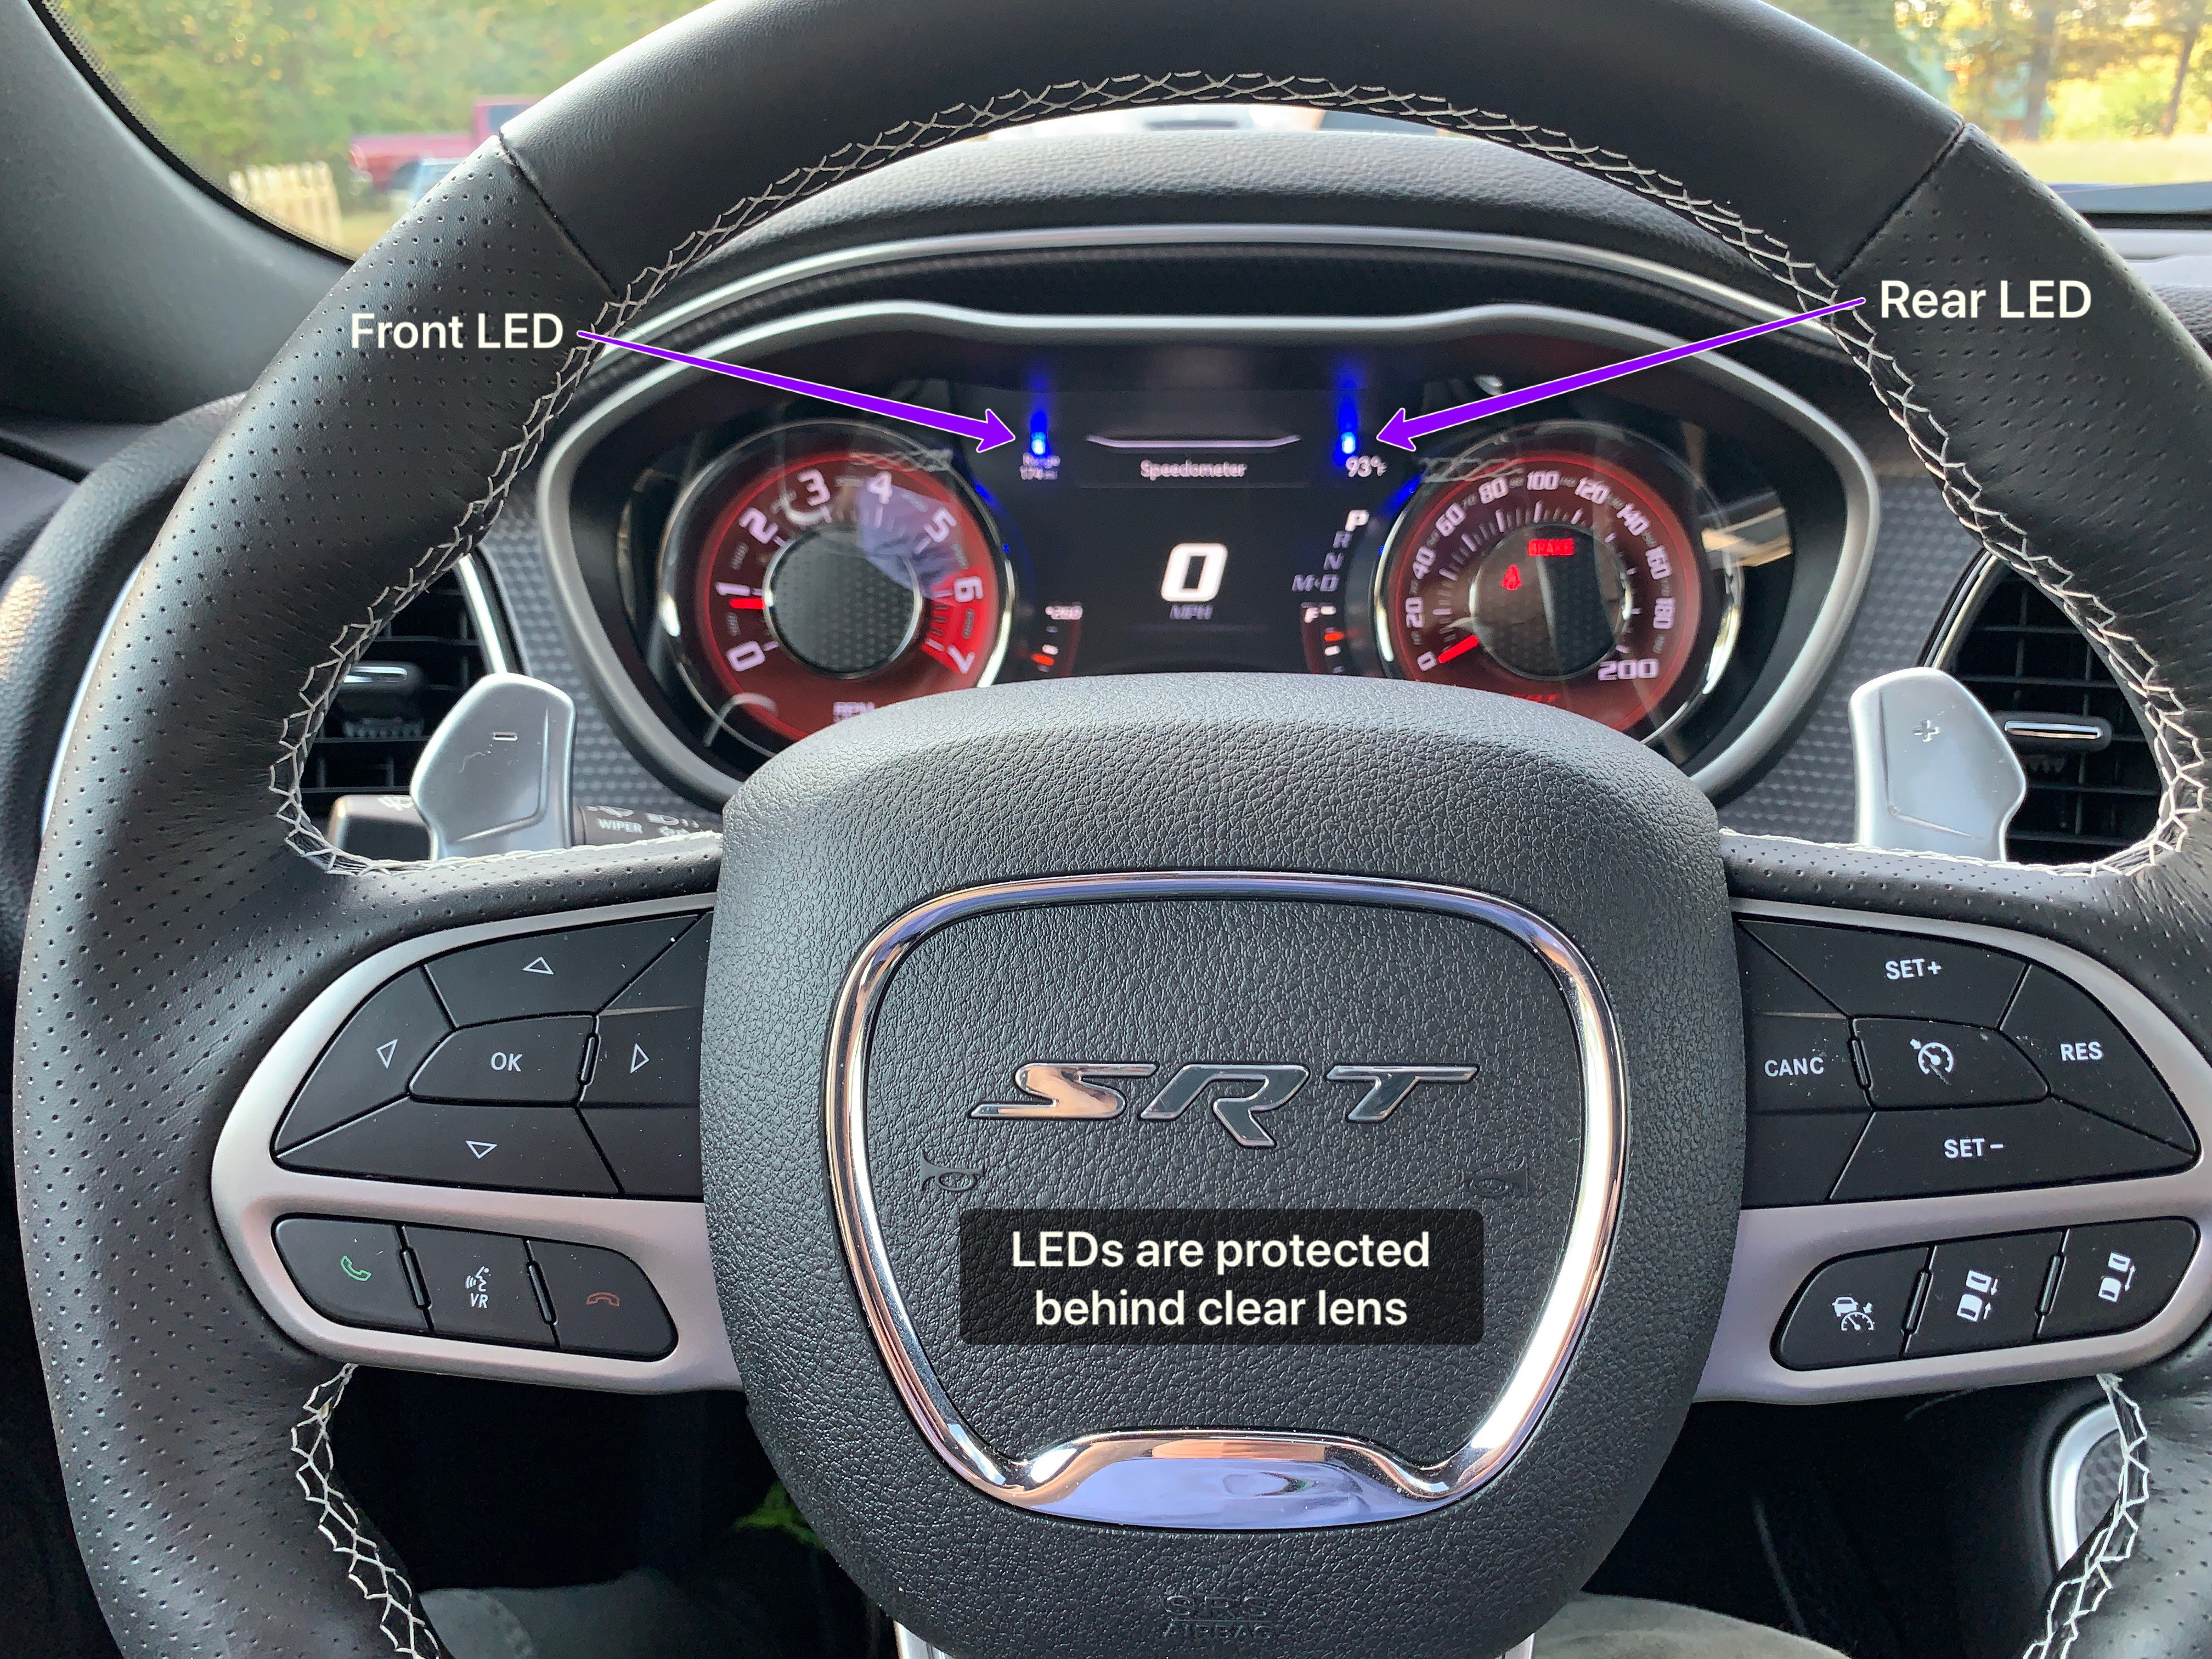 K40 Hidden Alert LED's in the Instrument Cluster of a 2019 Dodge Challenger SRT Hellcat Widebody in Concord, NC